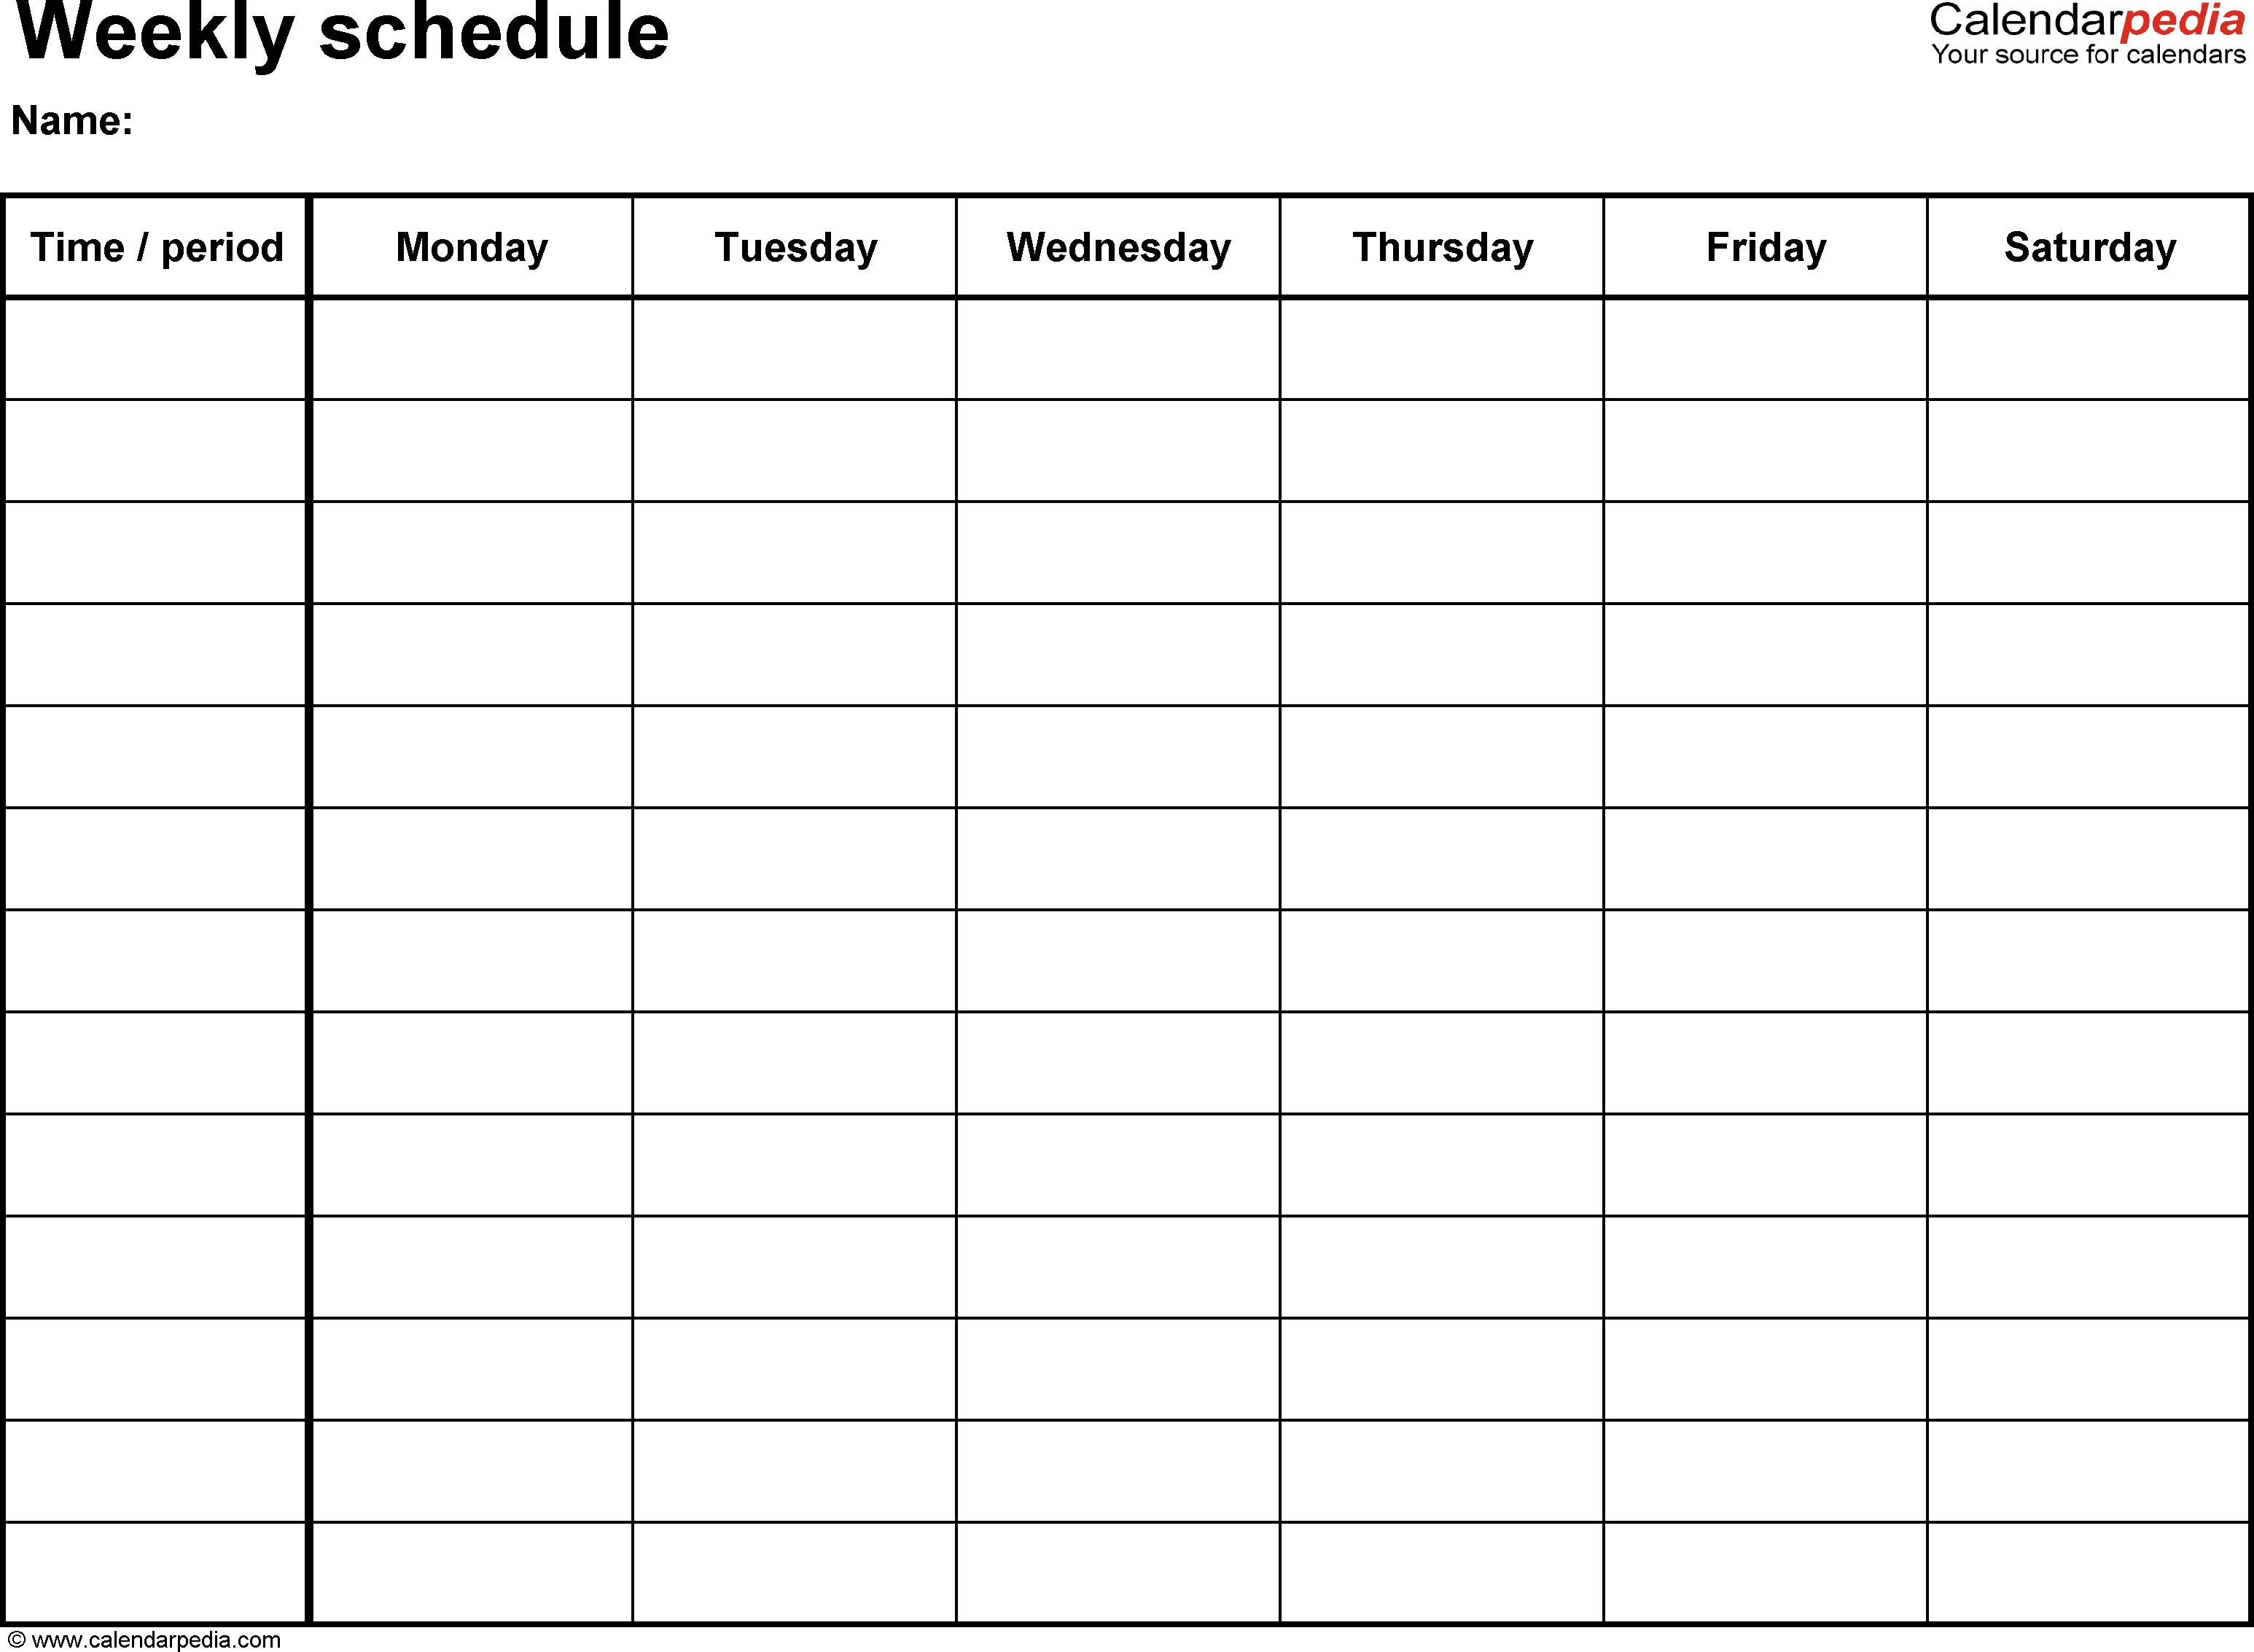 Free Weekly Schedule Templates For Excel - 18 Templates pertaining to Plan Calendar Template For 6 Weeks